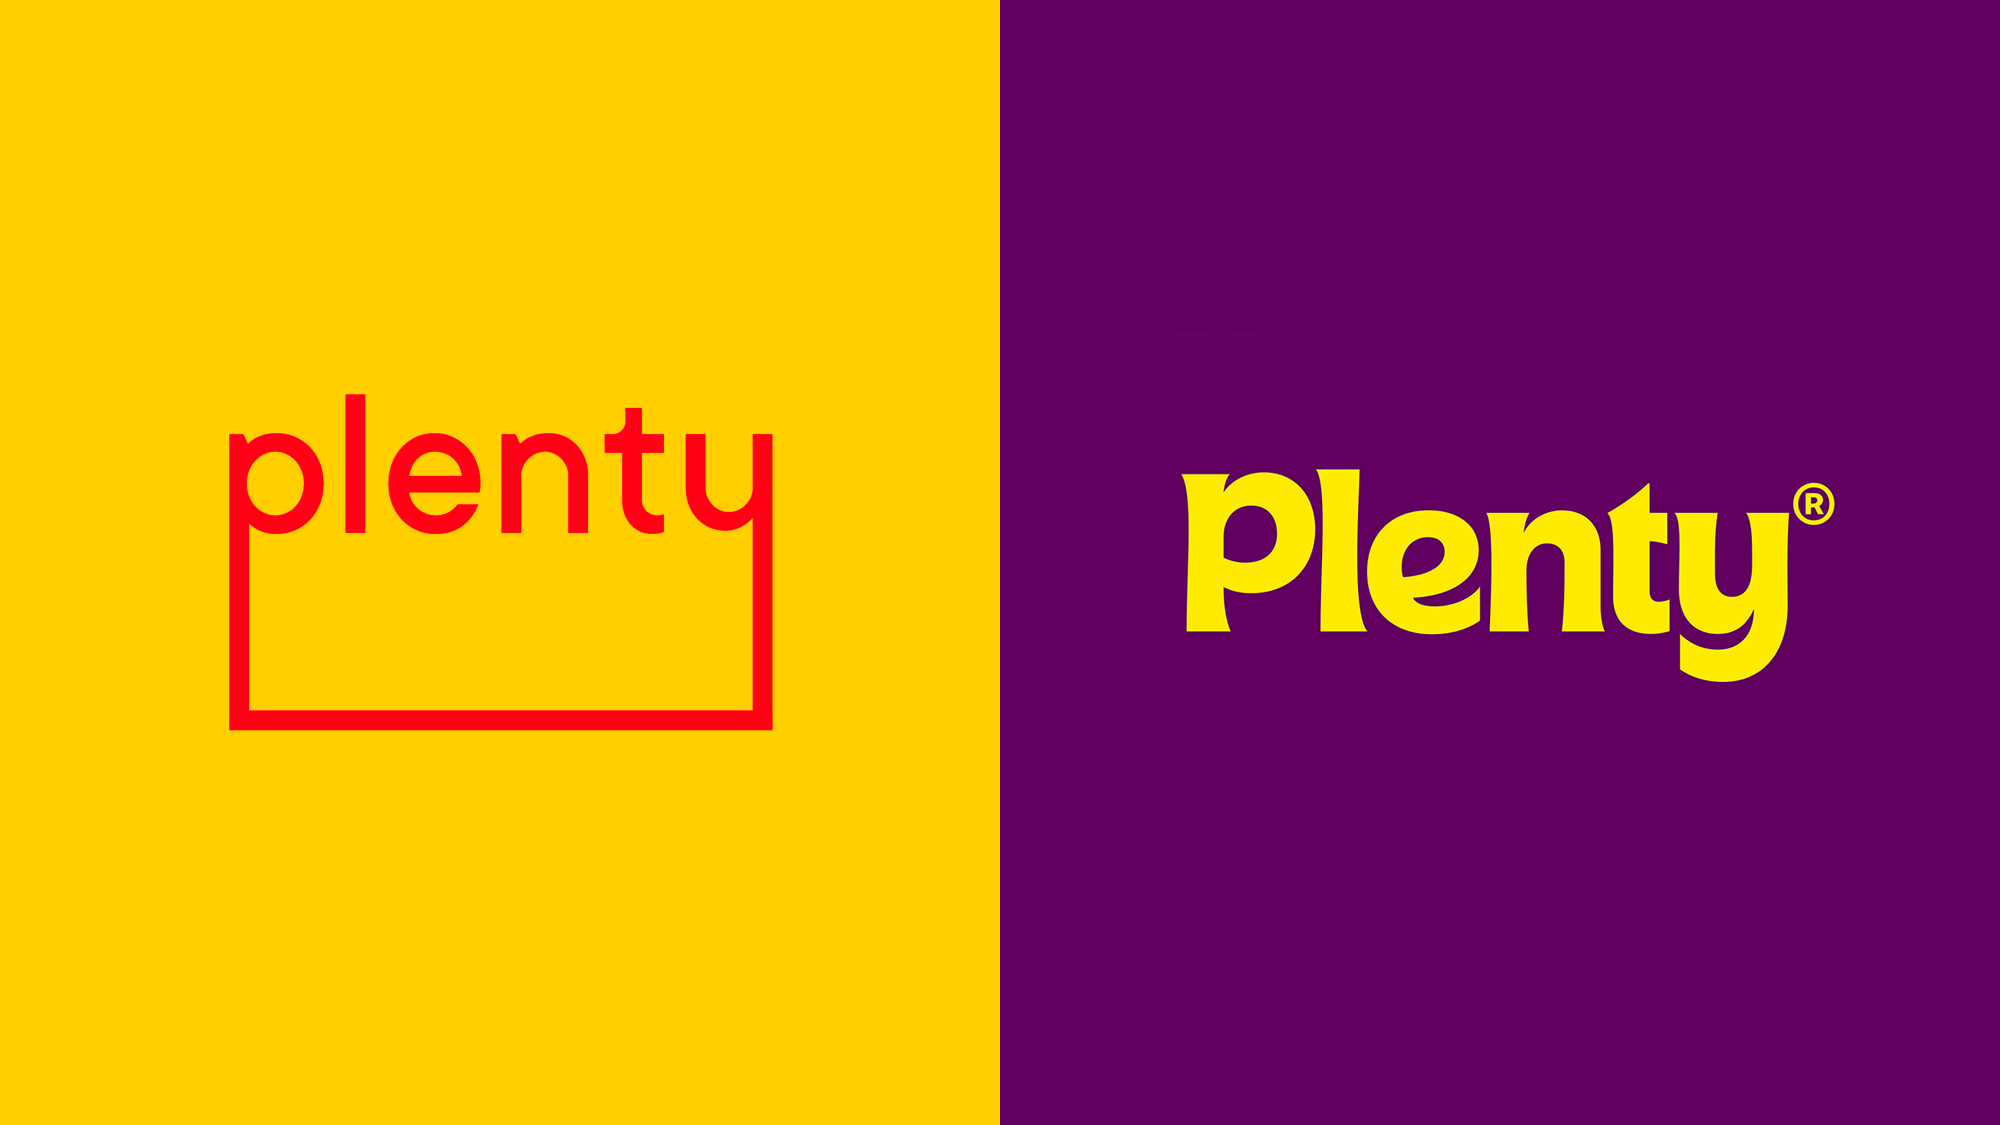 Brand New: New Logo and Identity for Plenty by &Walsh